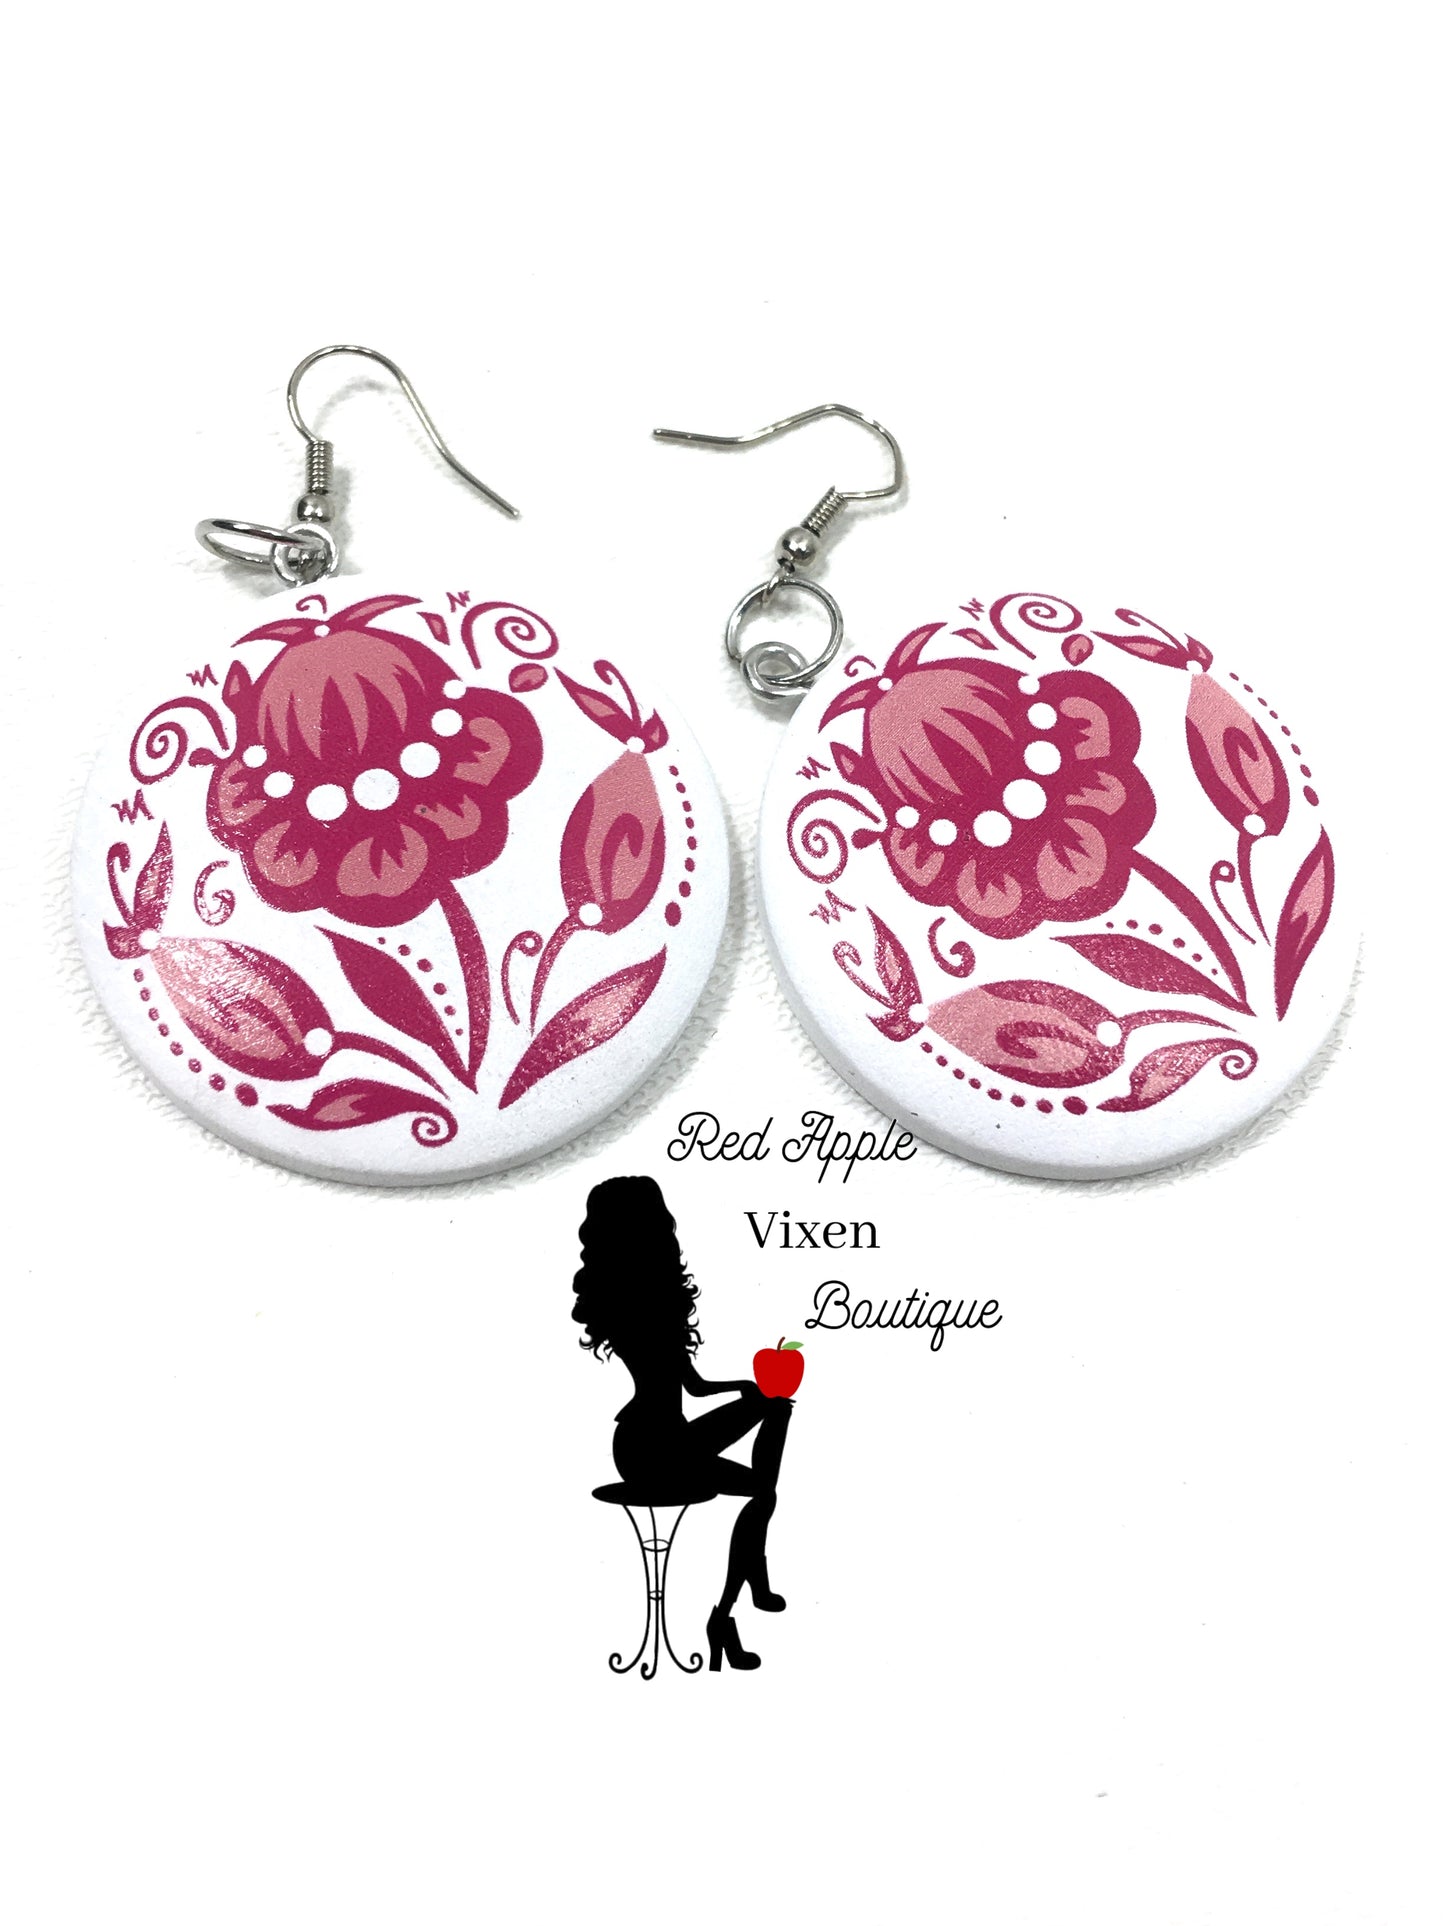 Wood Floral Painted Earrings - Red Apple Vixen Boutique